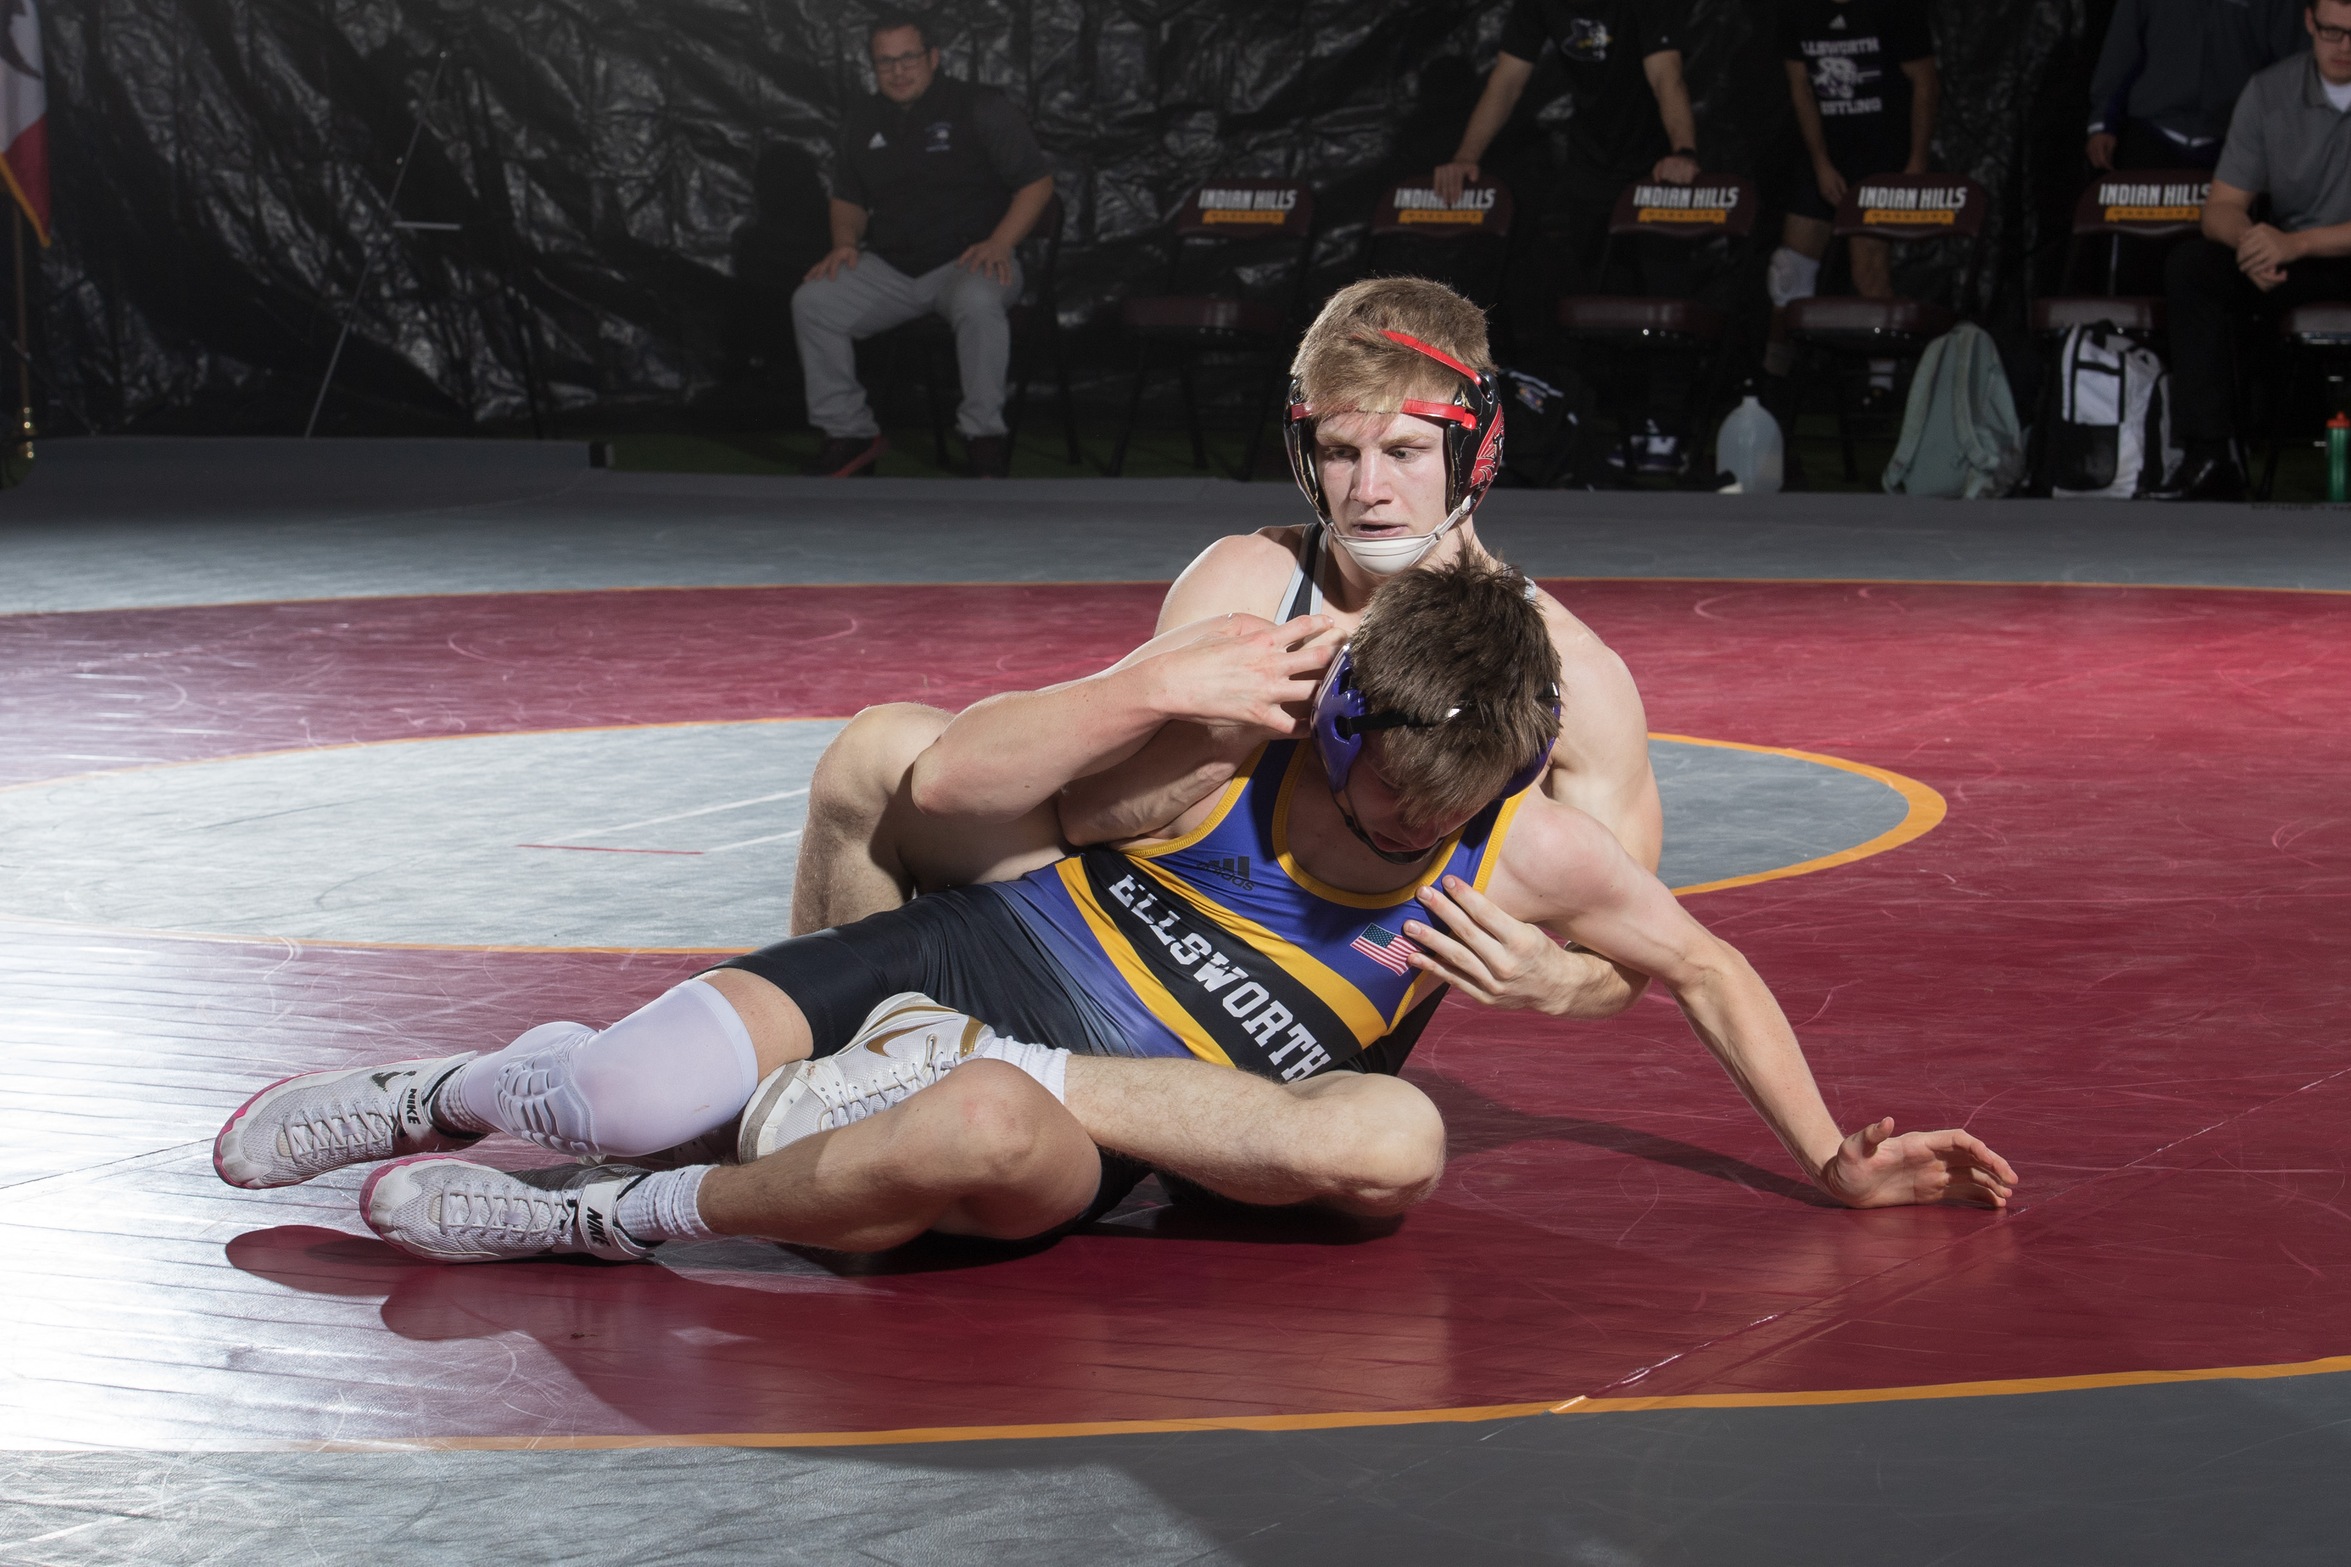 WARRIORS PLACE SIXTH AT NATIONAL DUALS